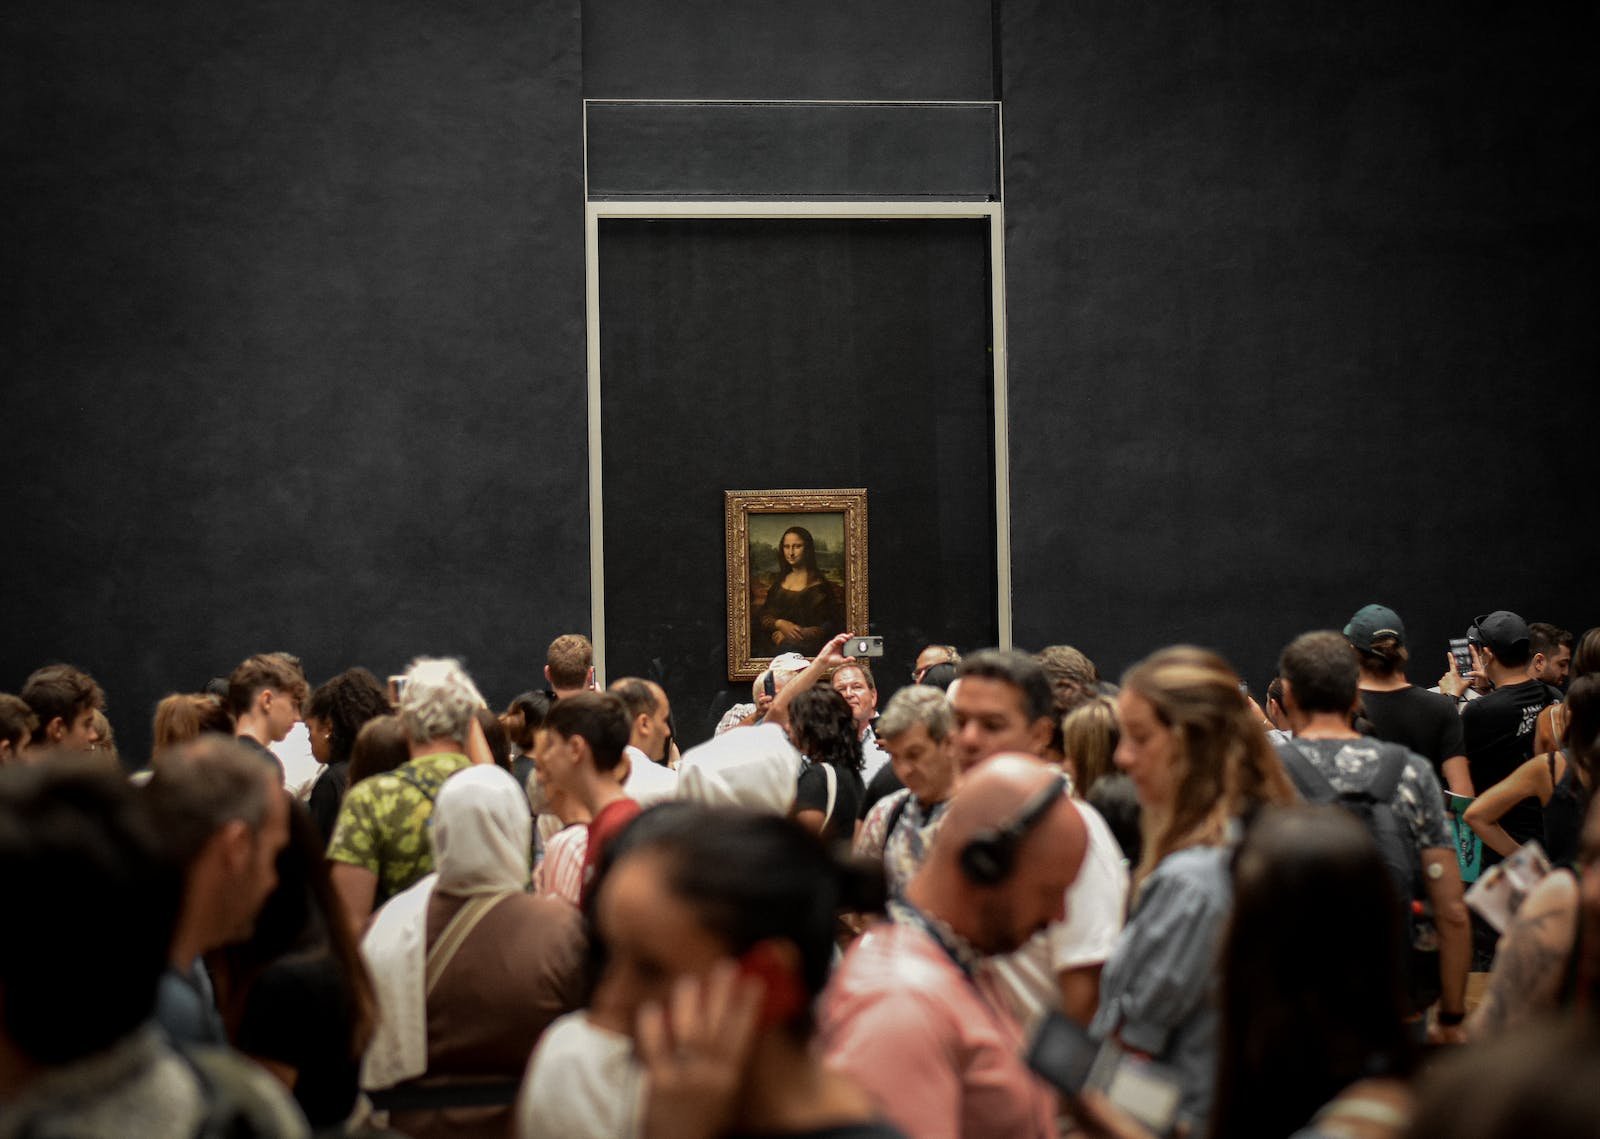 Crowd of Visitors in front of Mona Lisa Painting in the Louvre